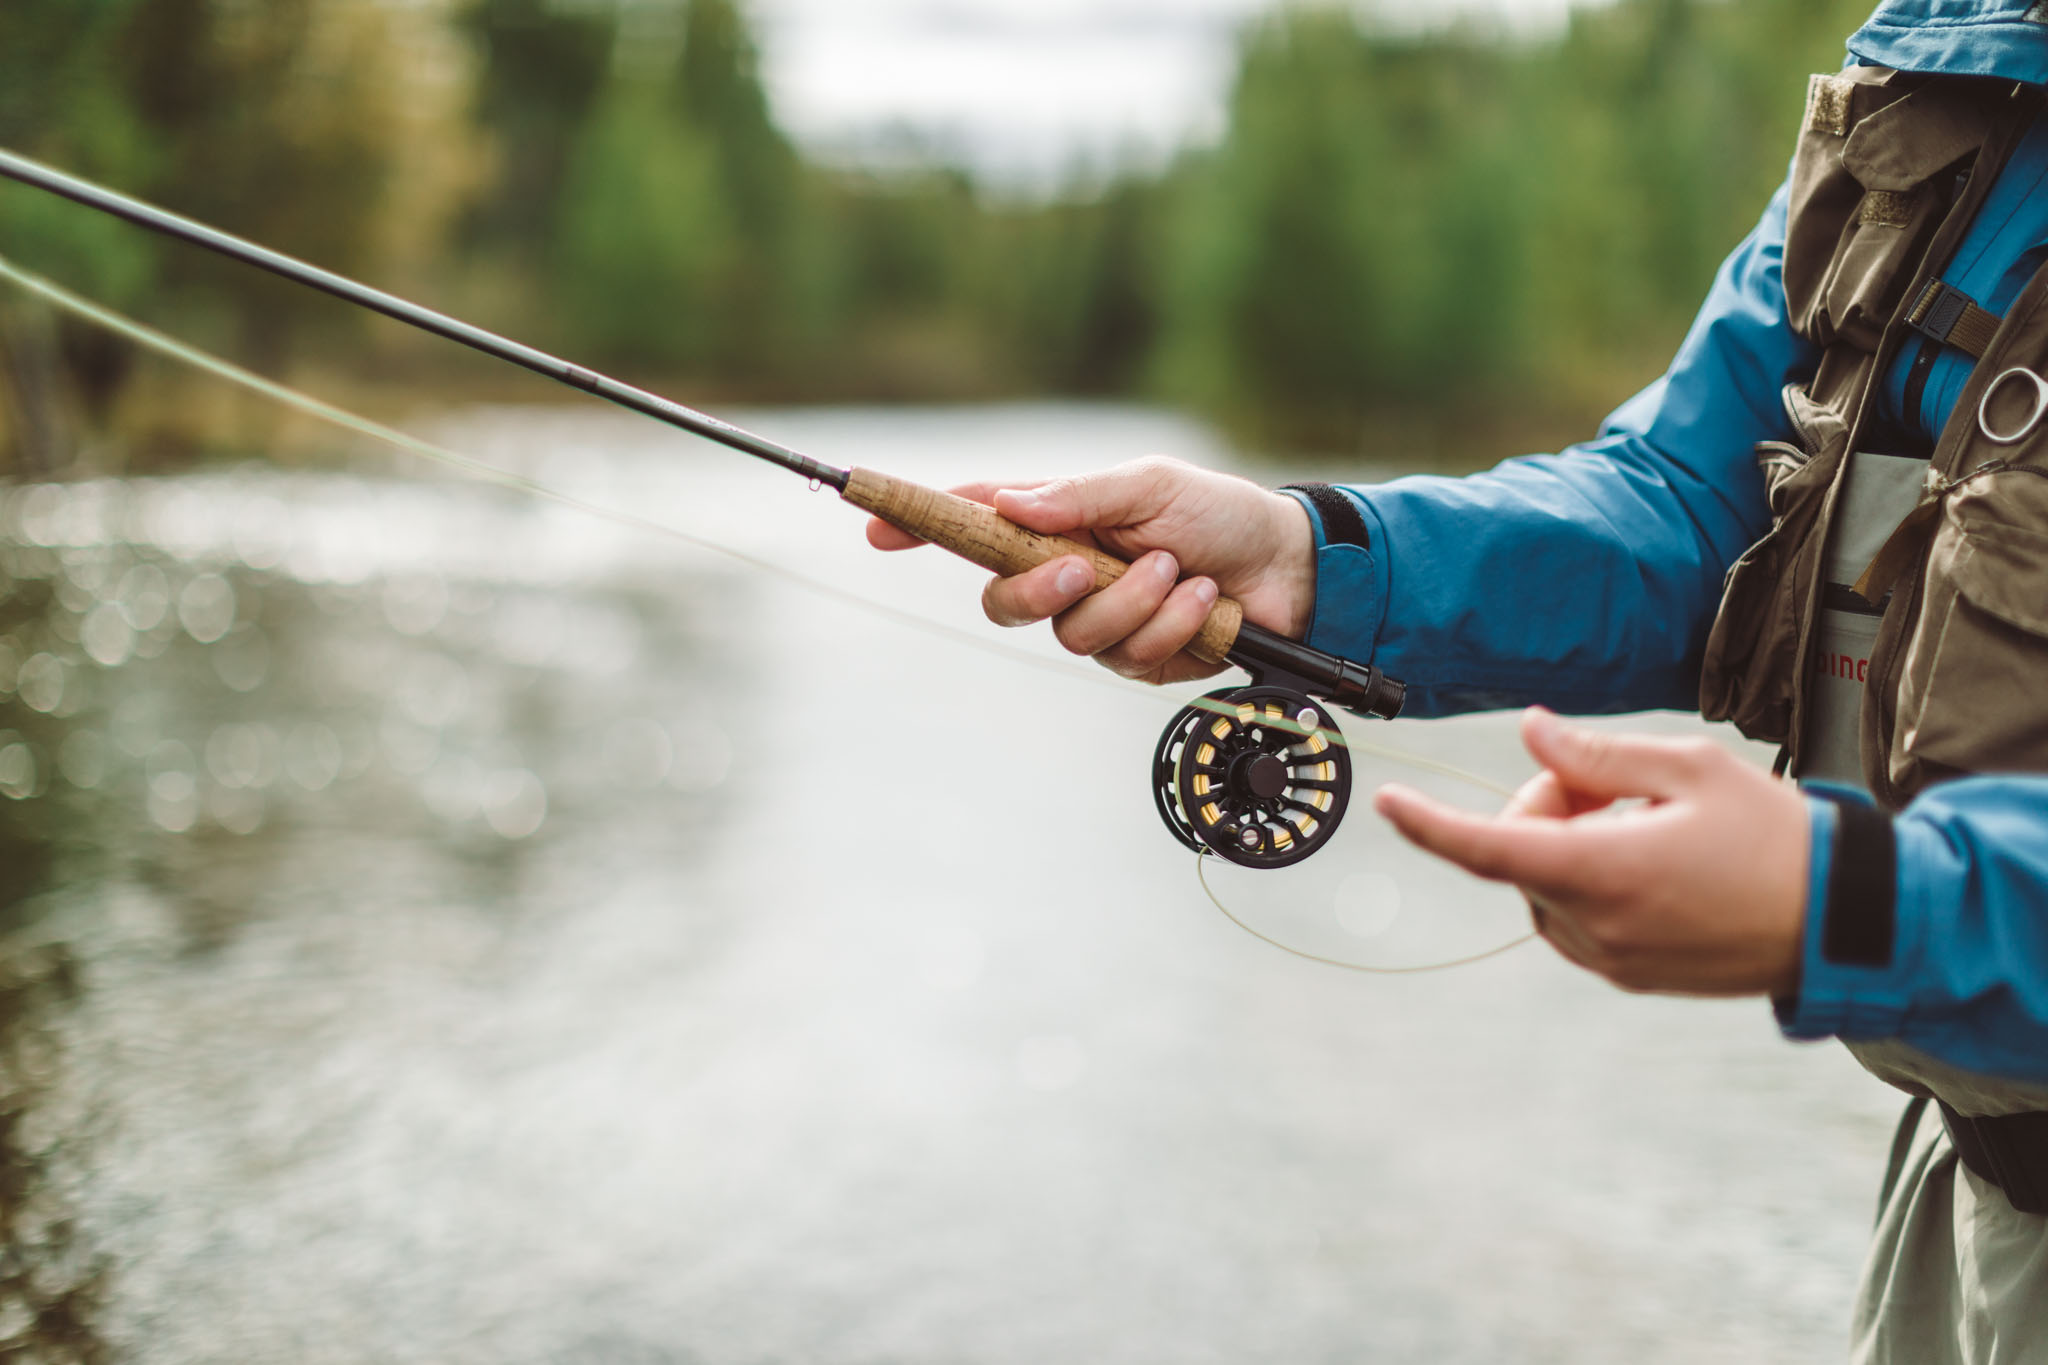 Fly fishing lifestyle product photography. Fishing with flyrod.